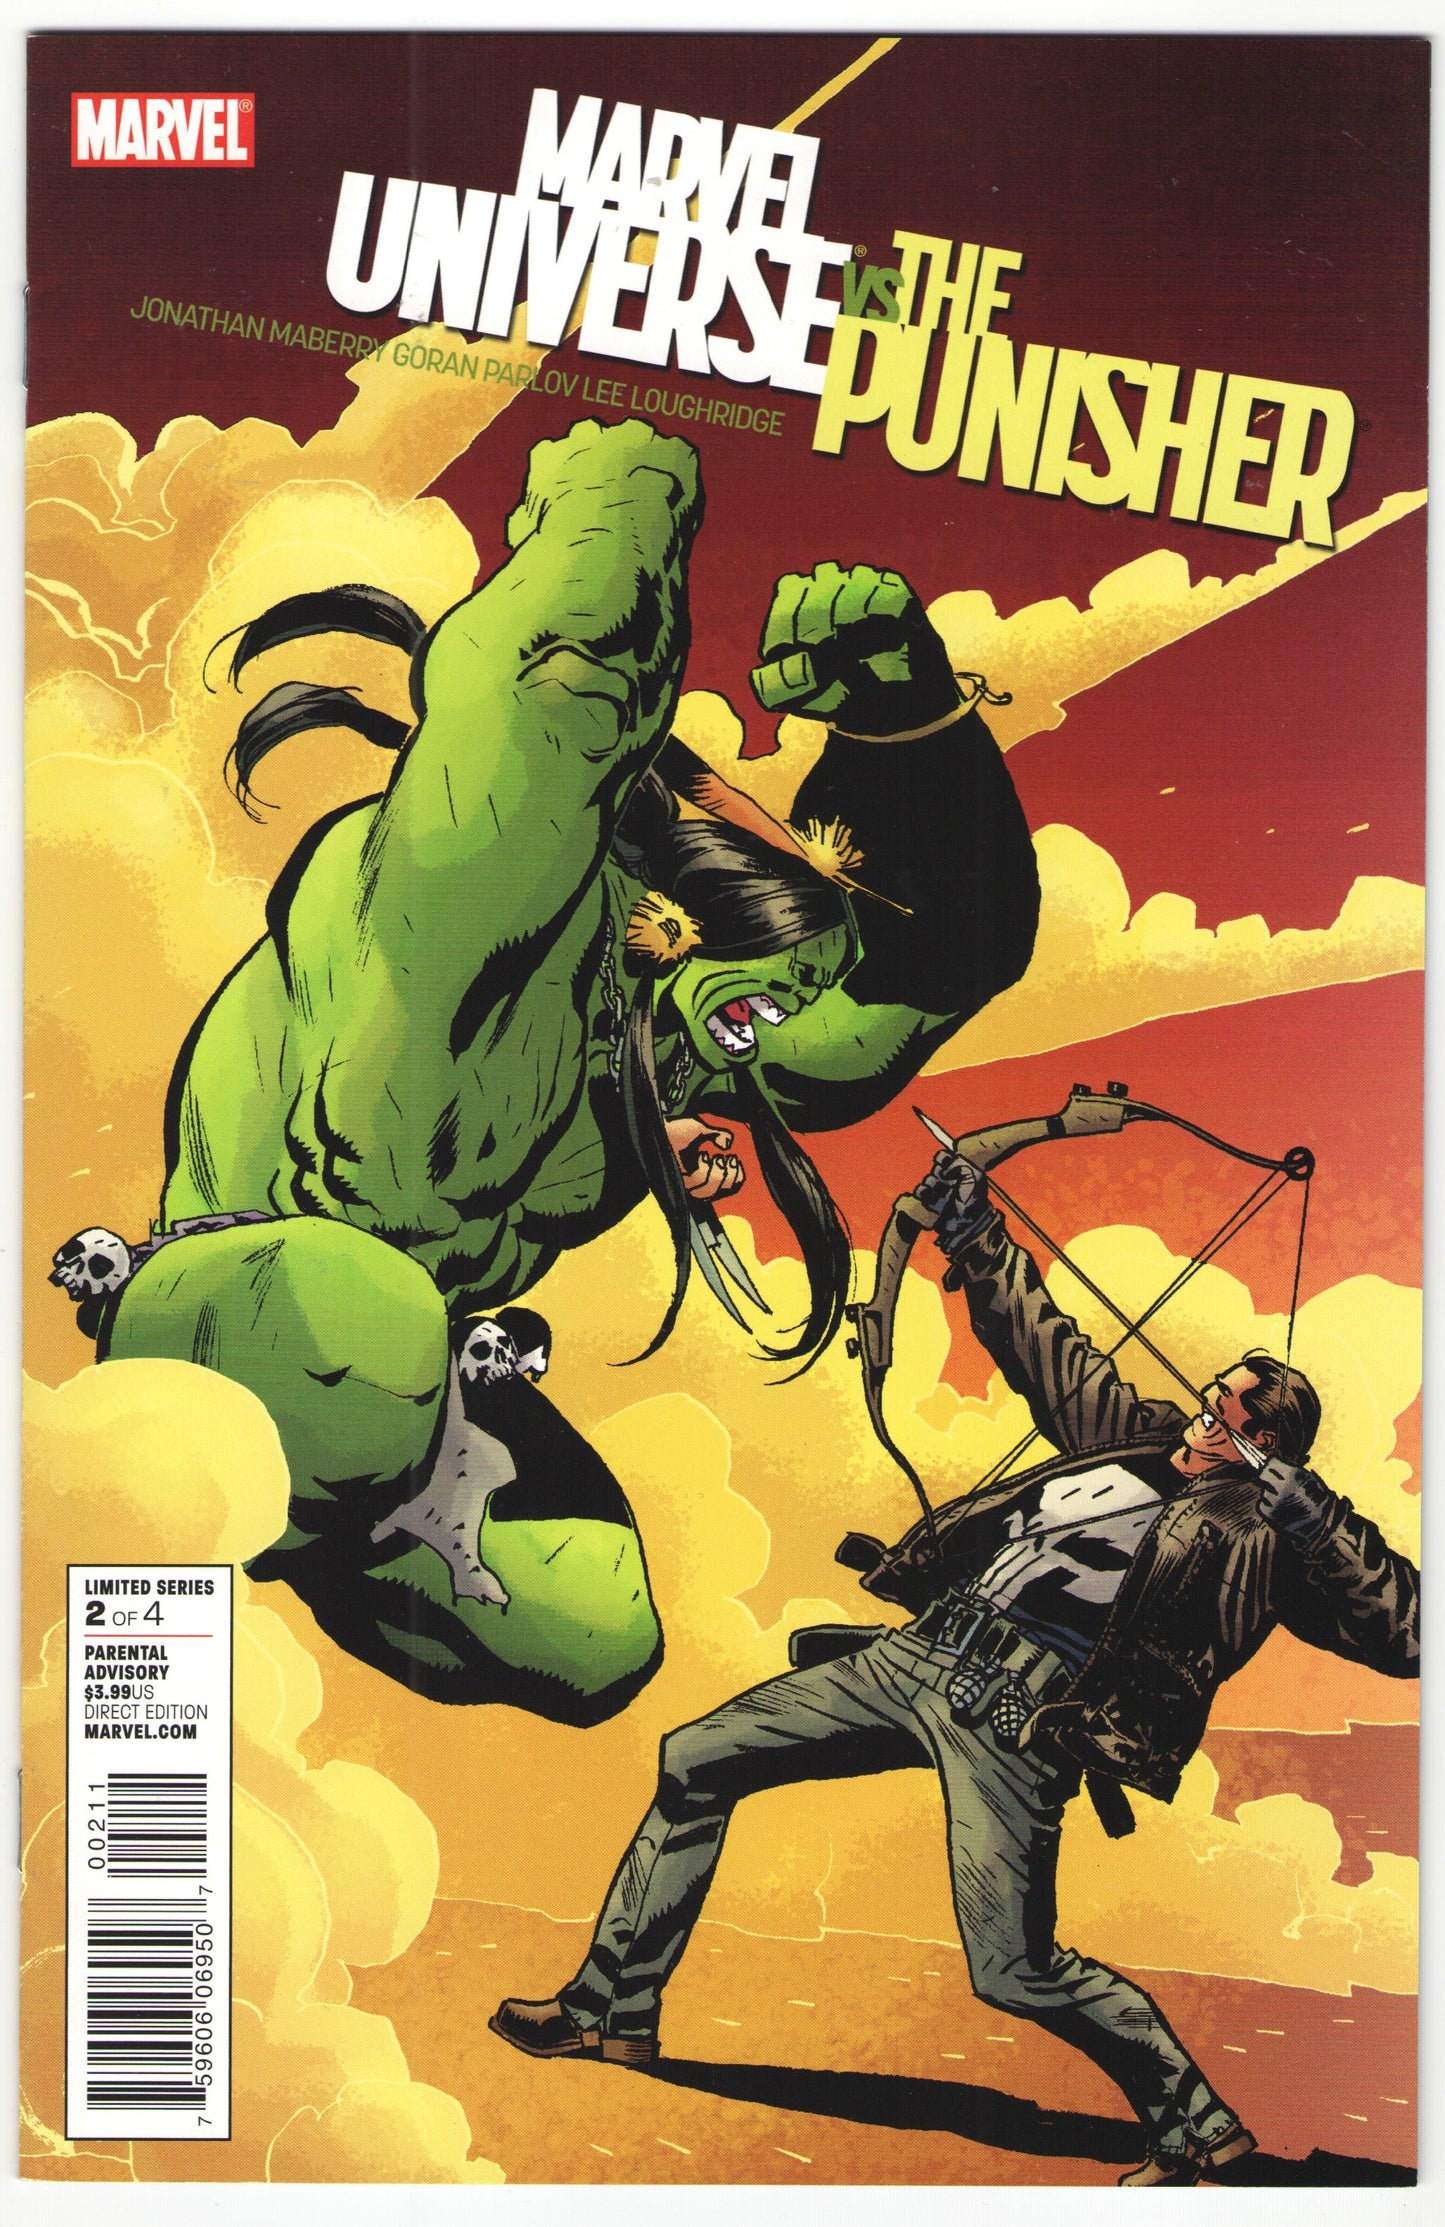 Marvel Universe vs. Punisher (2010) Limited Series 3 of 4 Issues